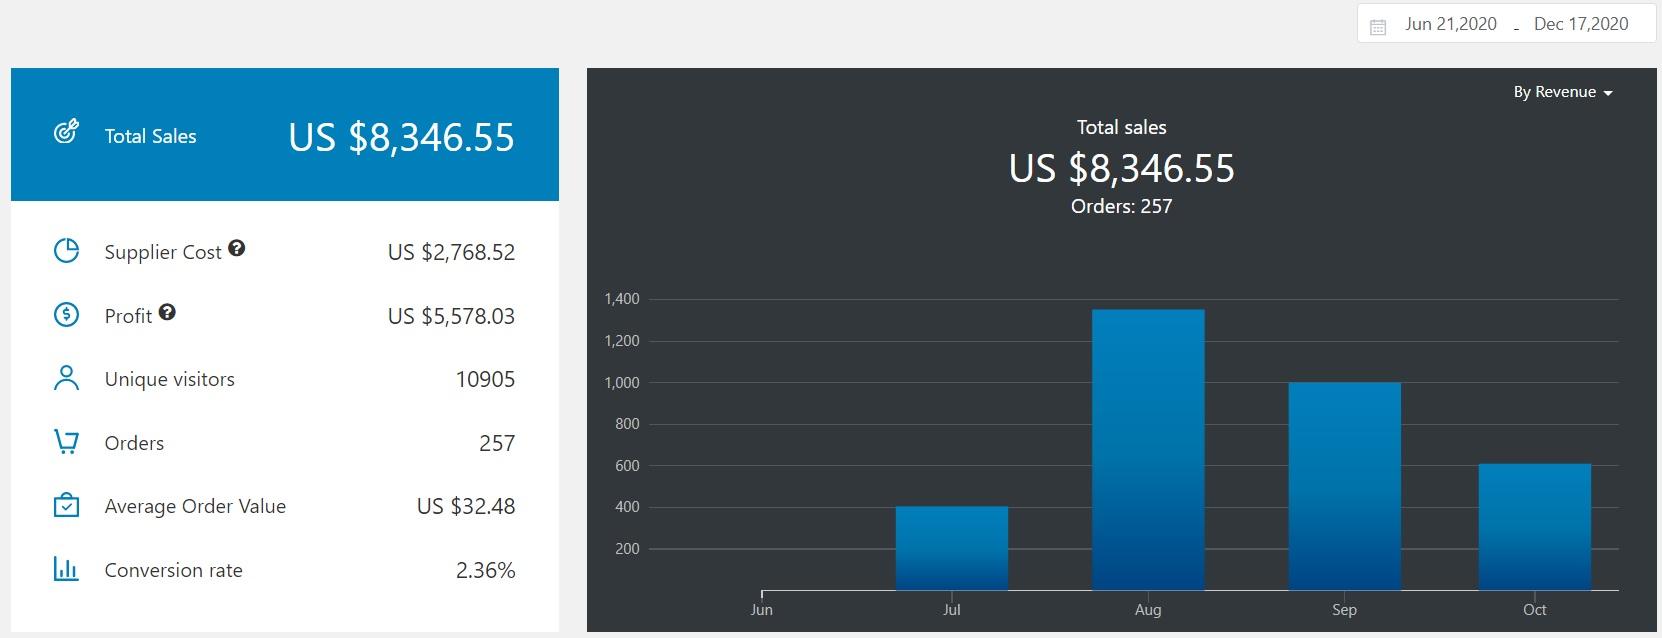 A screenshot showing sales numbers of a turnkey ecommerce website